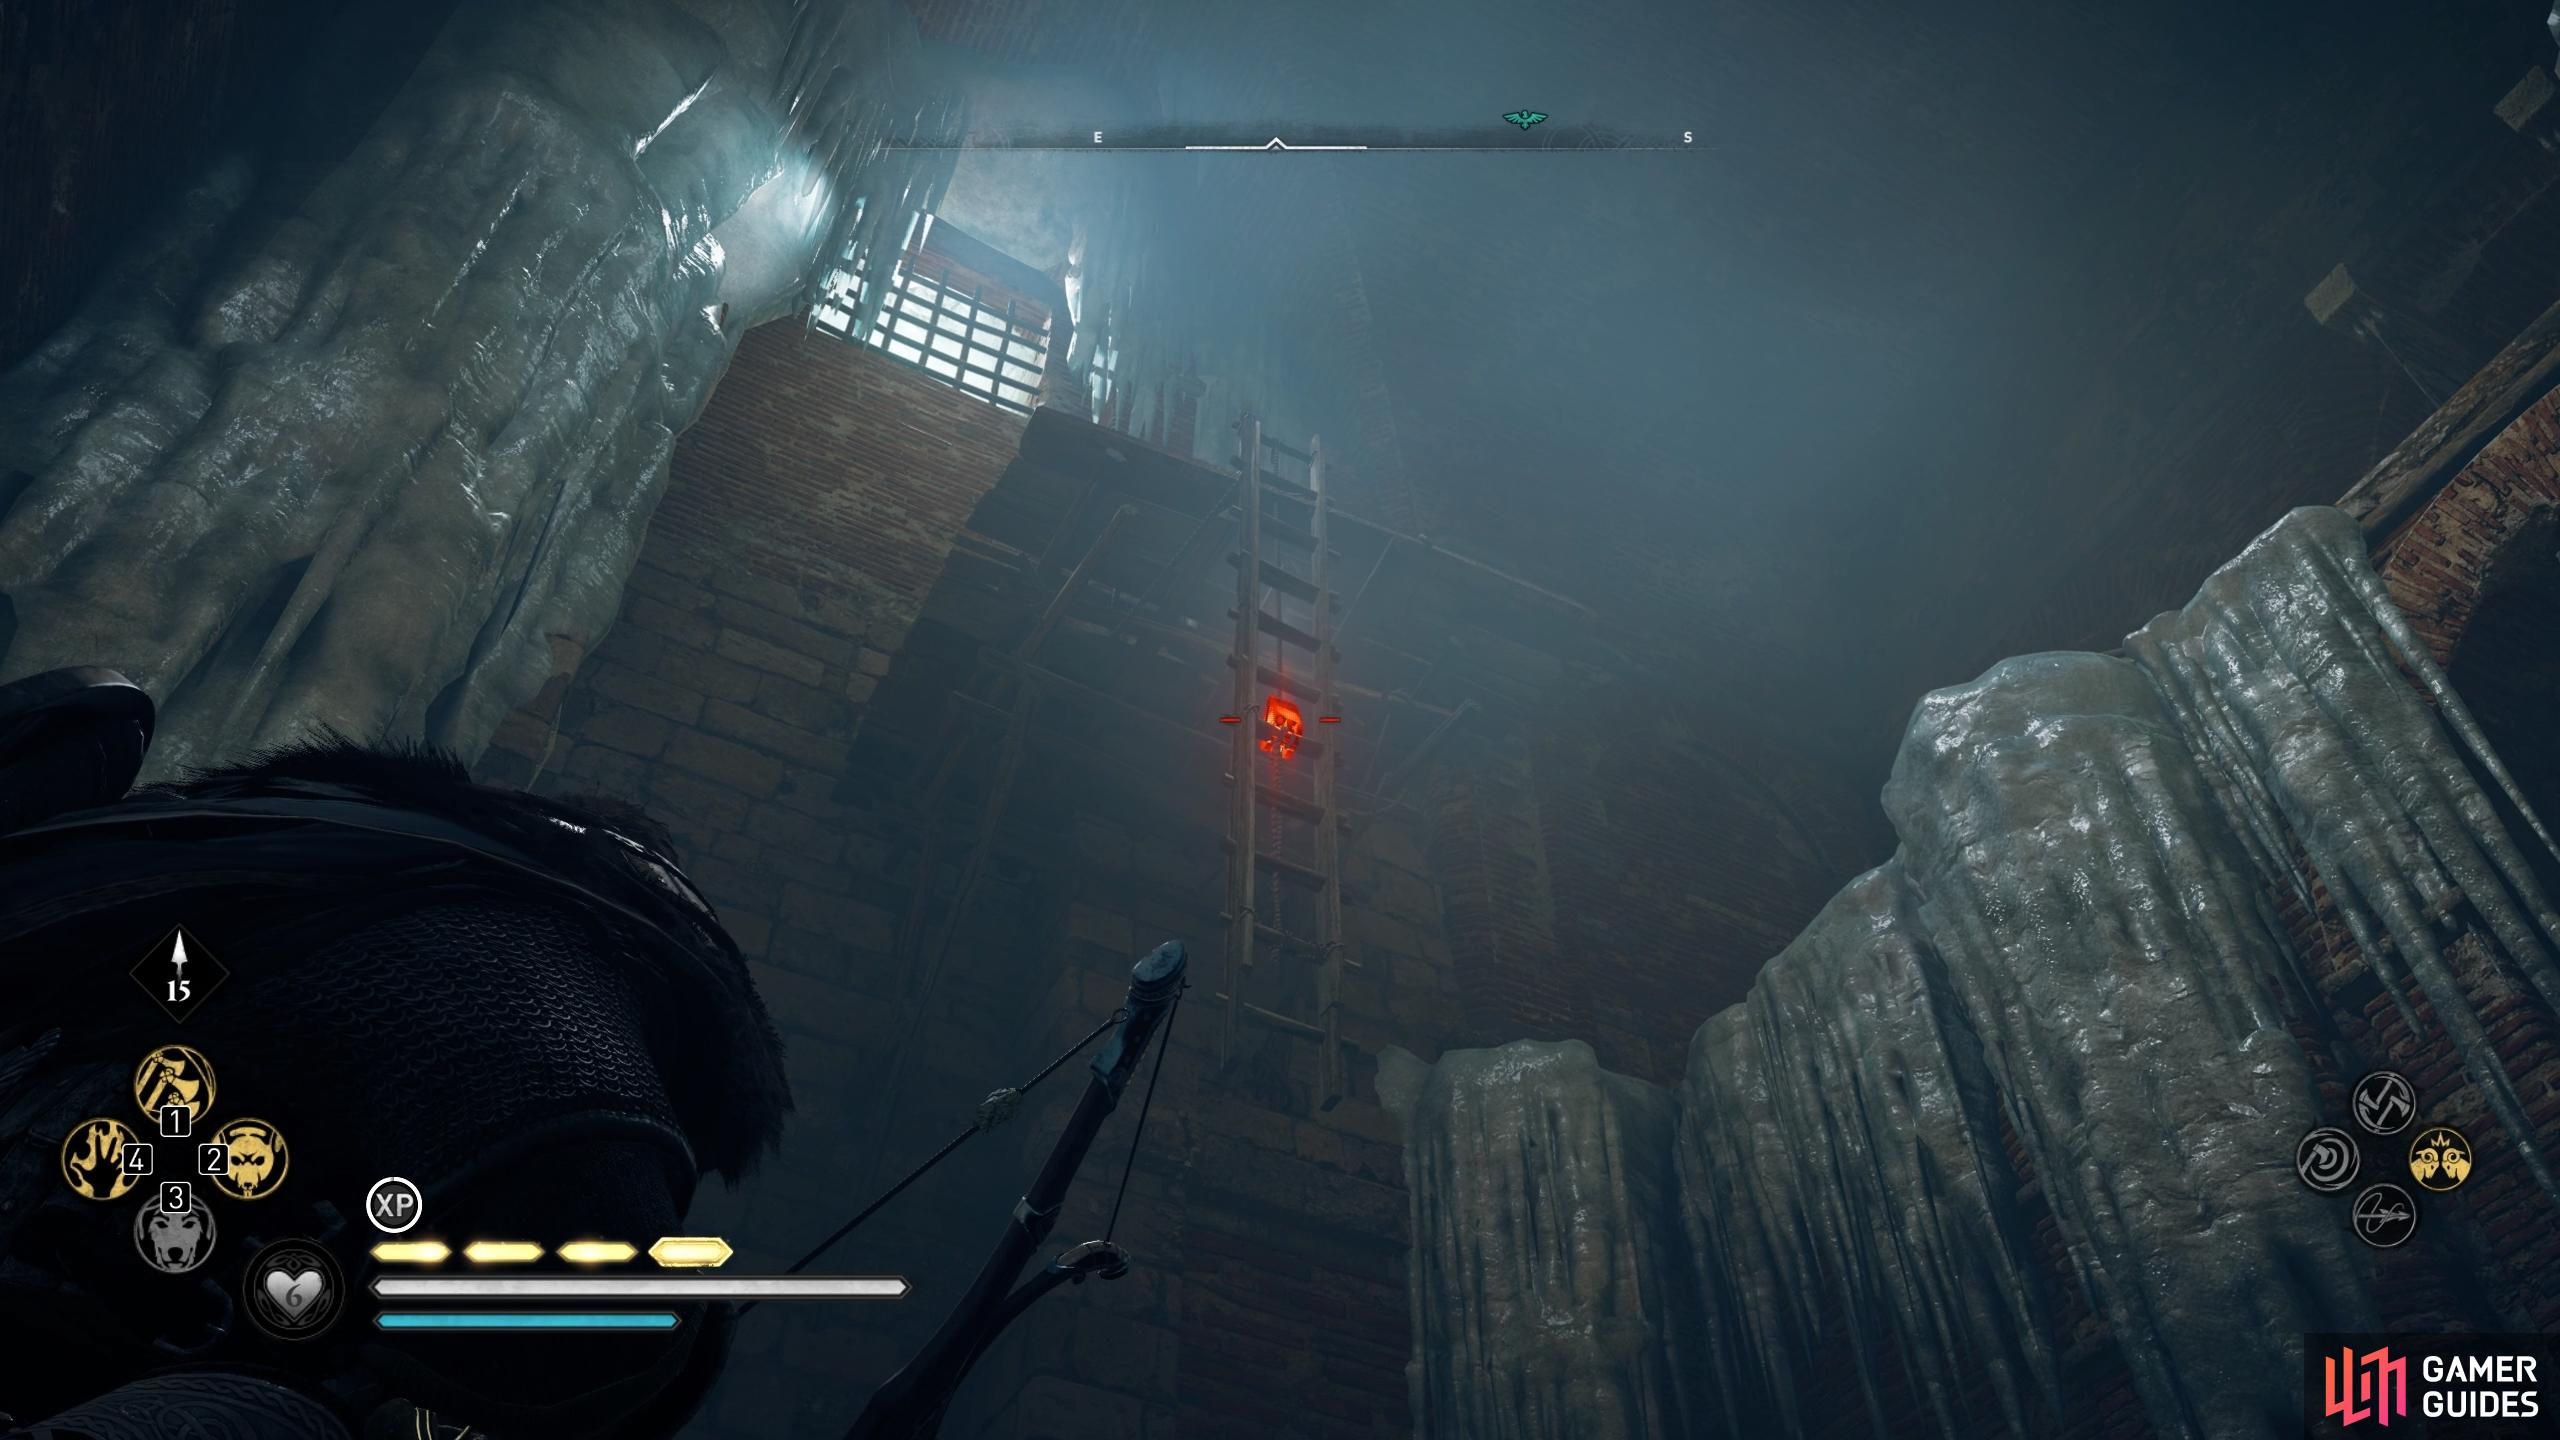 Shoot the link in the ladder to lower it, then jump onto it from the stone pillar.